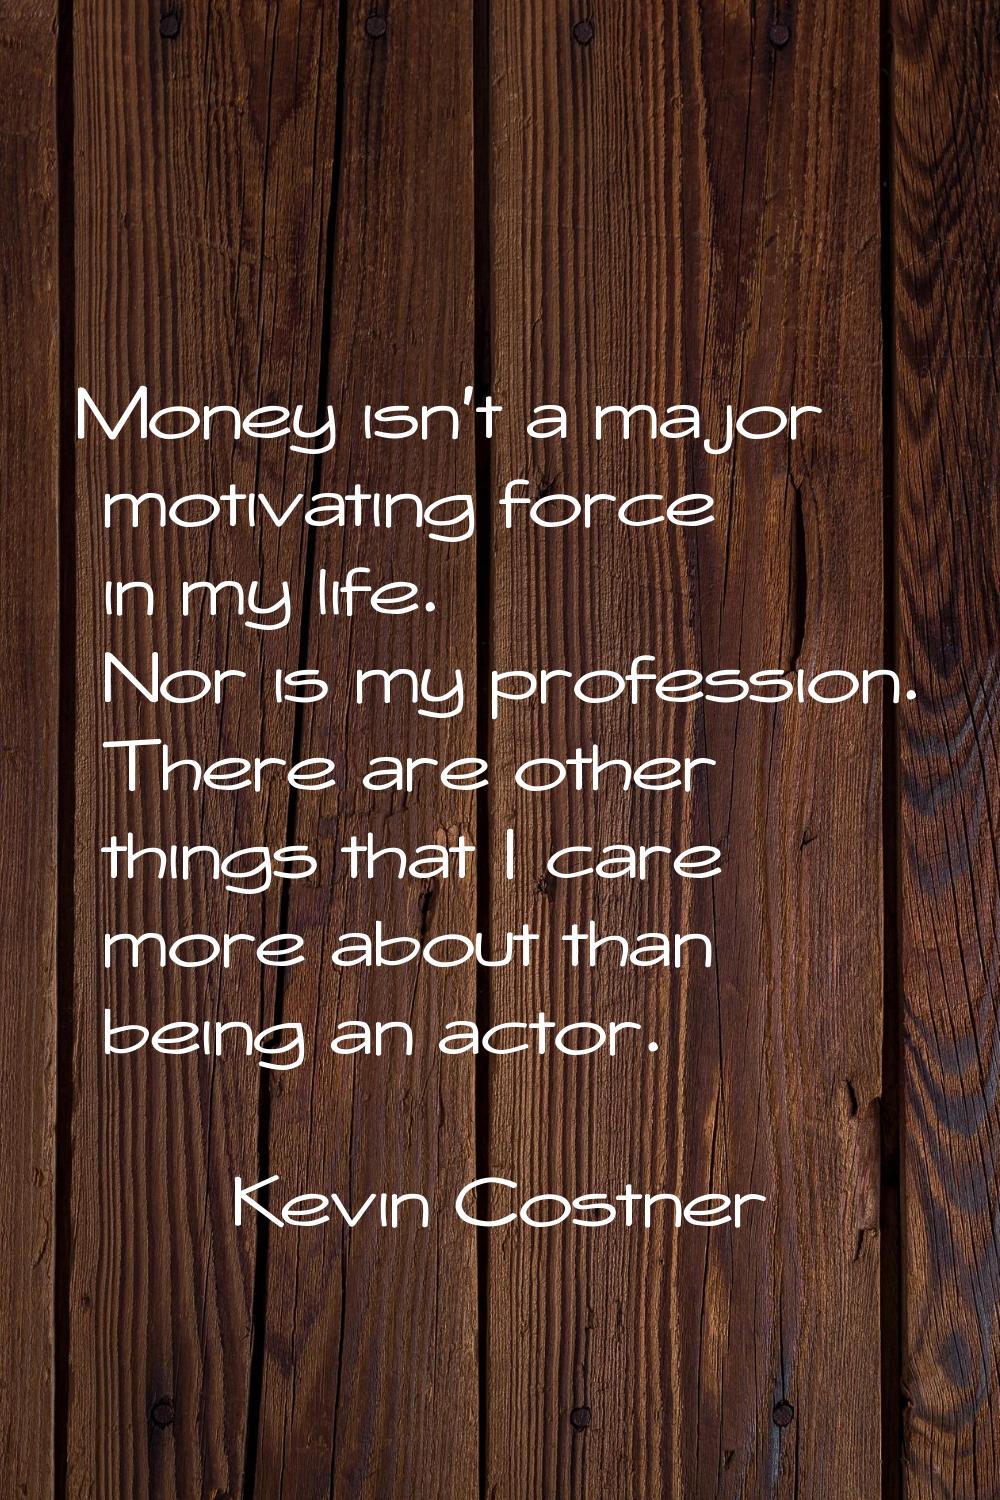 Money isn't a major motivating force in my life. Nor is my profession. There are other things that 